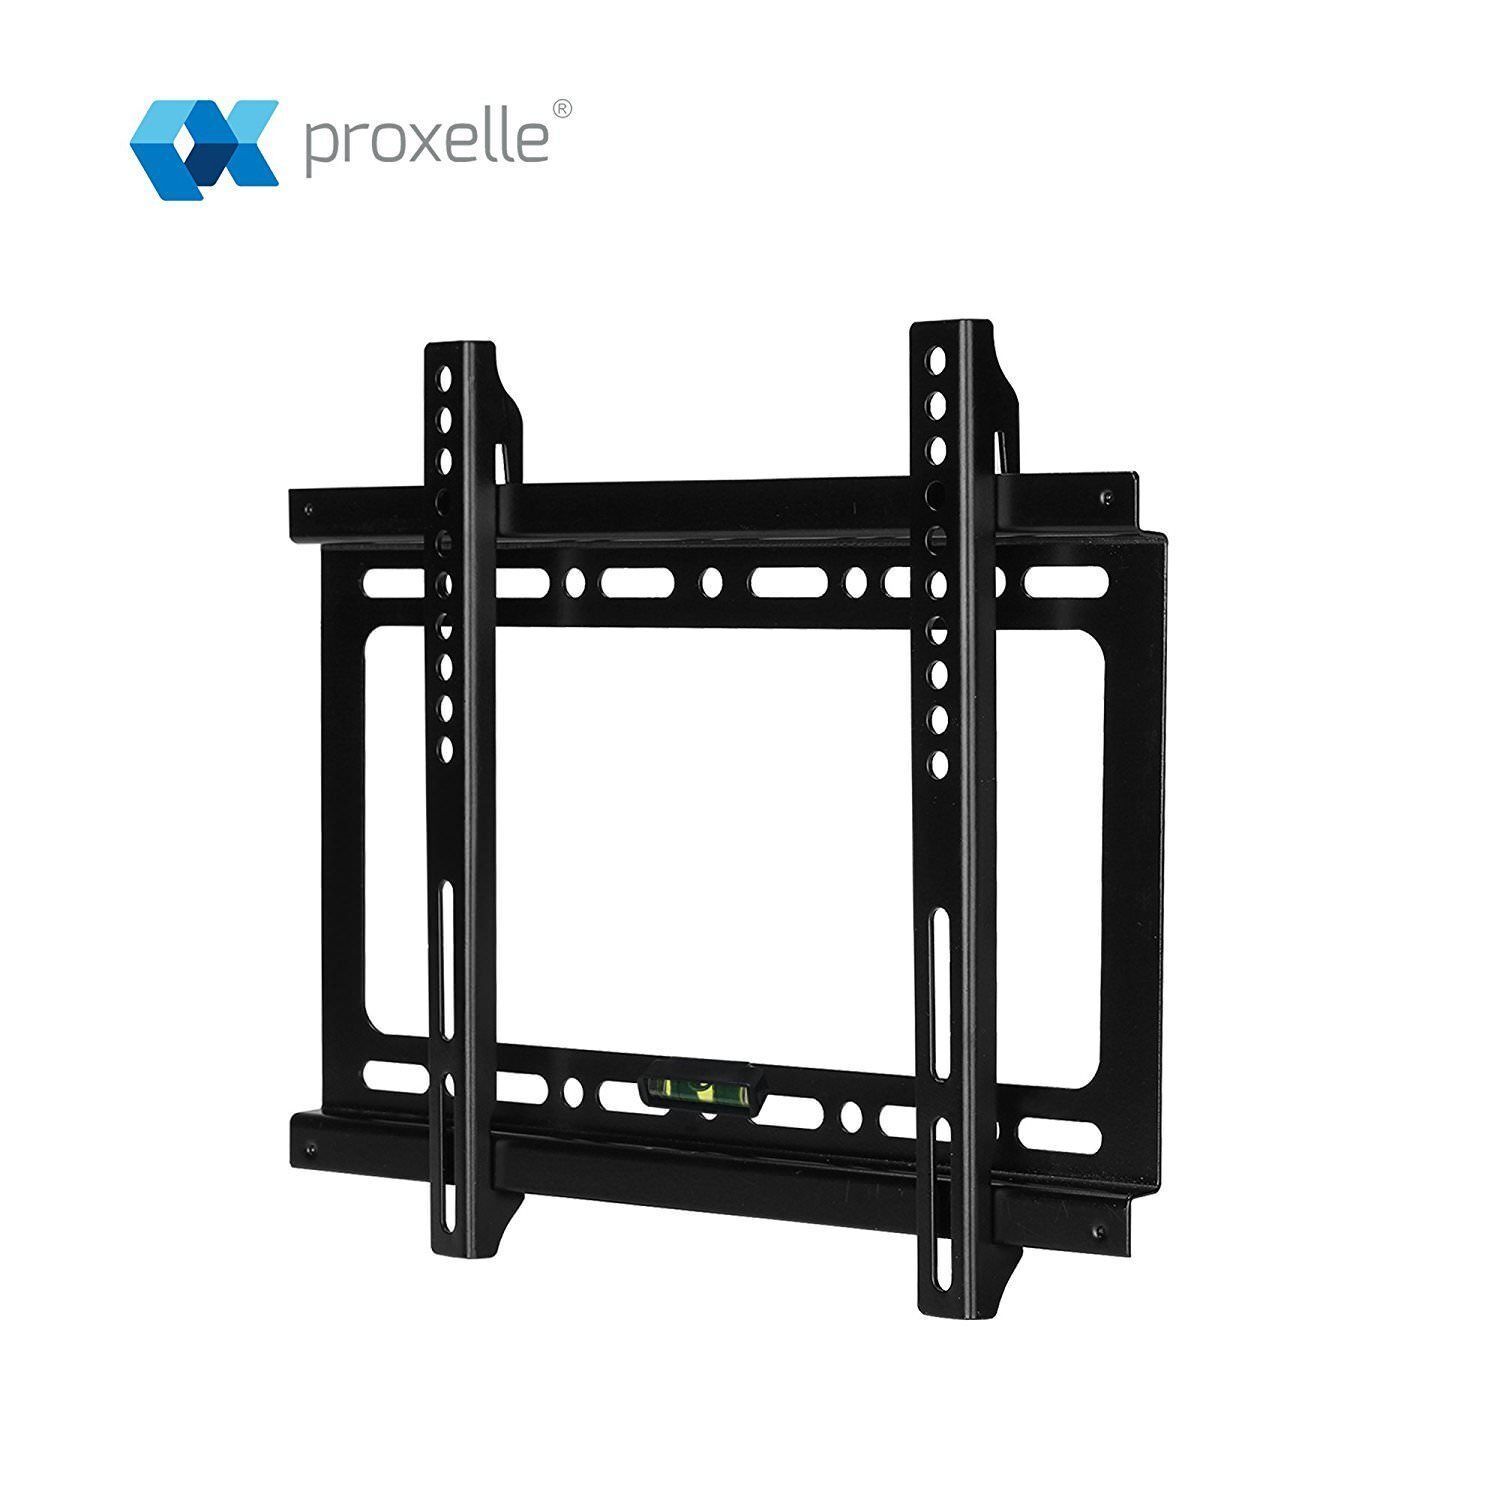 Full Motion TV Wall Mount Articulating Flat Fixed 19 20 22 23 24 26 27 28 32